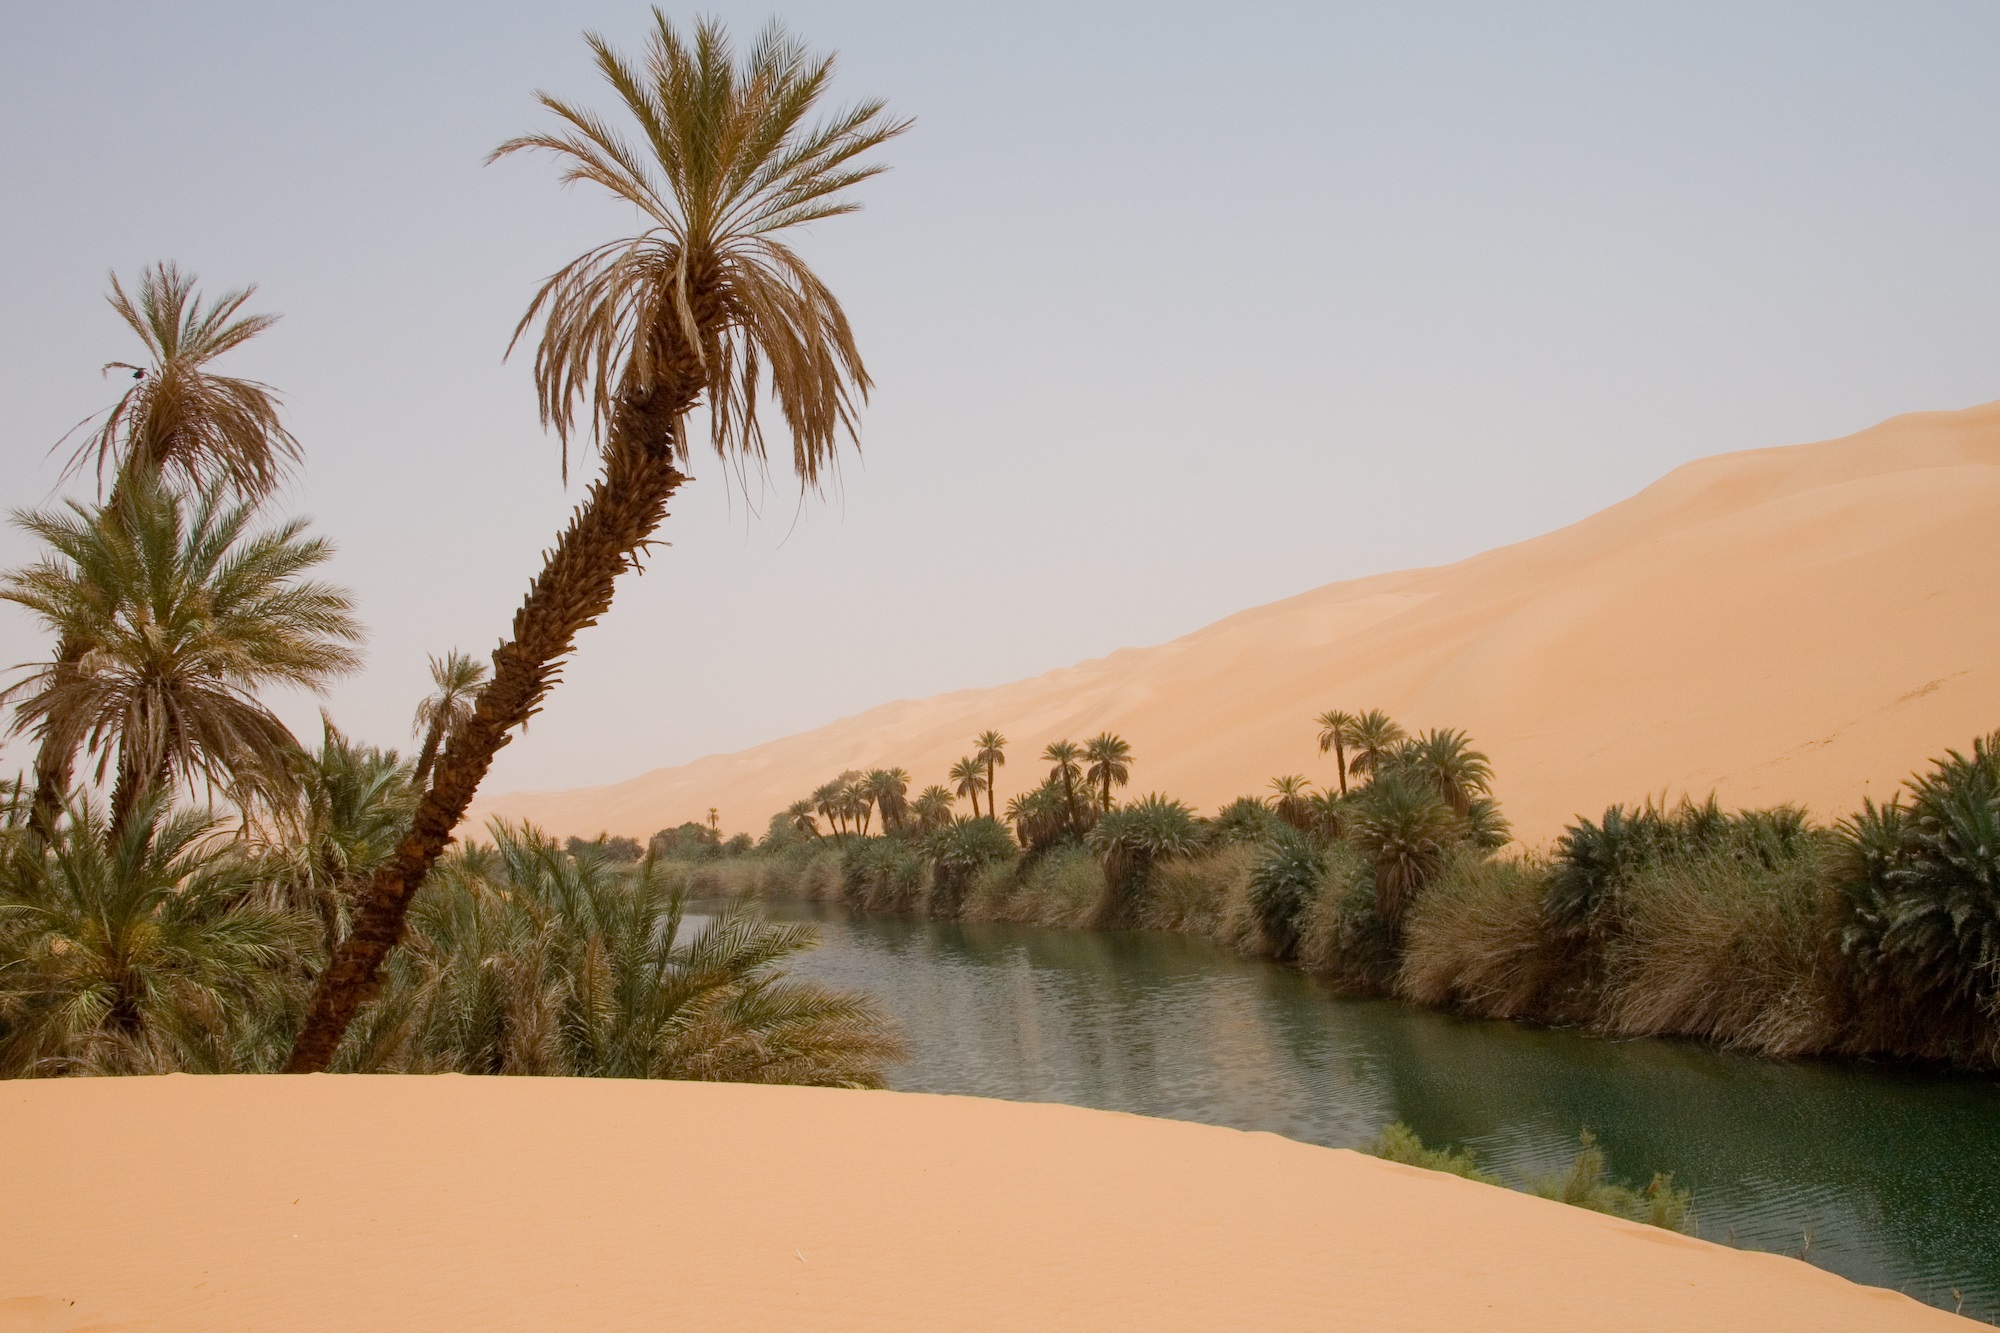 Palm trees in the oasis of Ubari in the Sahara